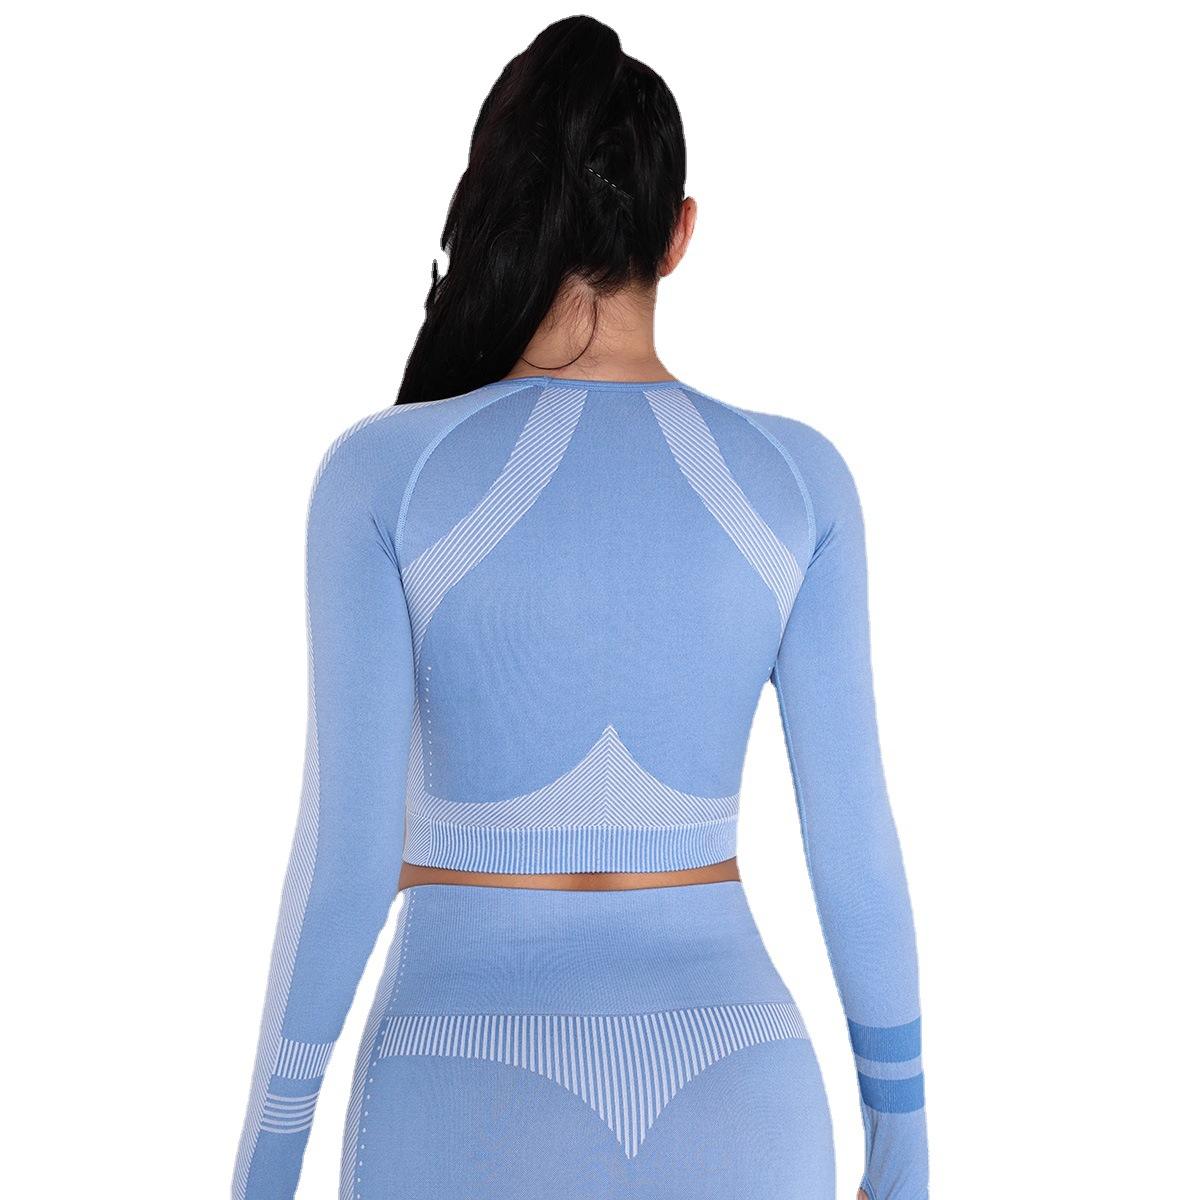 Wholesale Seamless Sportswear Cropped Tops Gym Fitness Wear Workout Girls Sexy Long Sleeve Tops Shirt